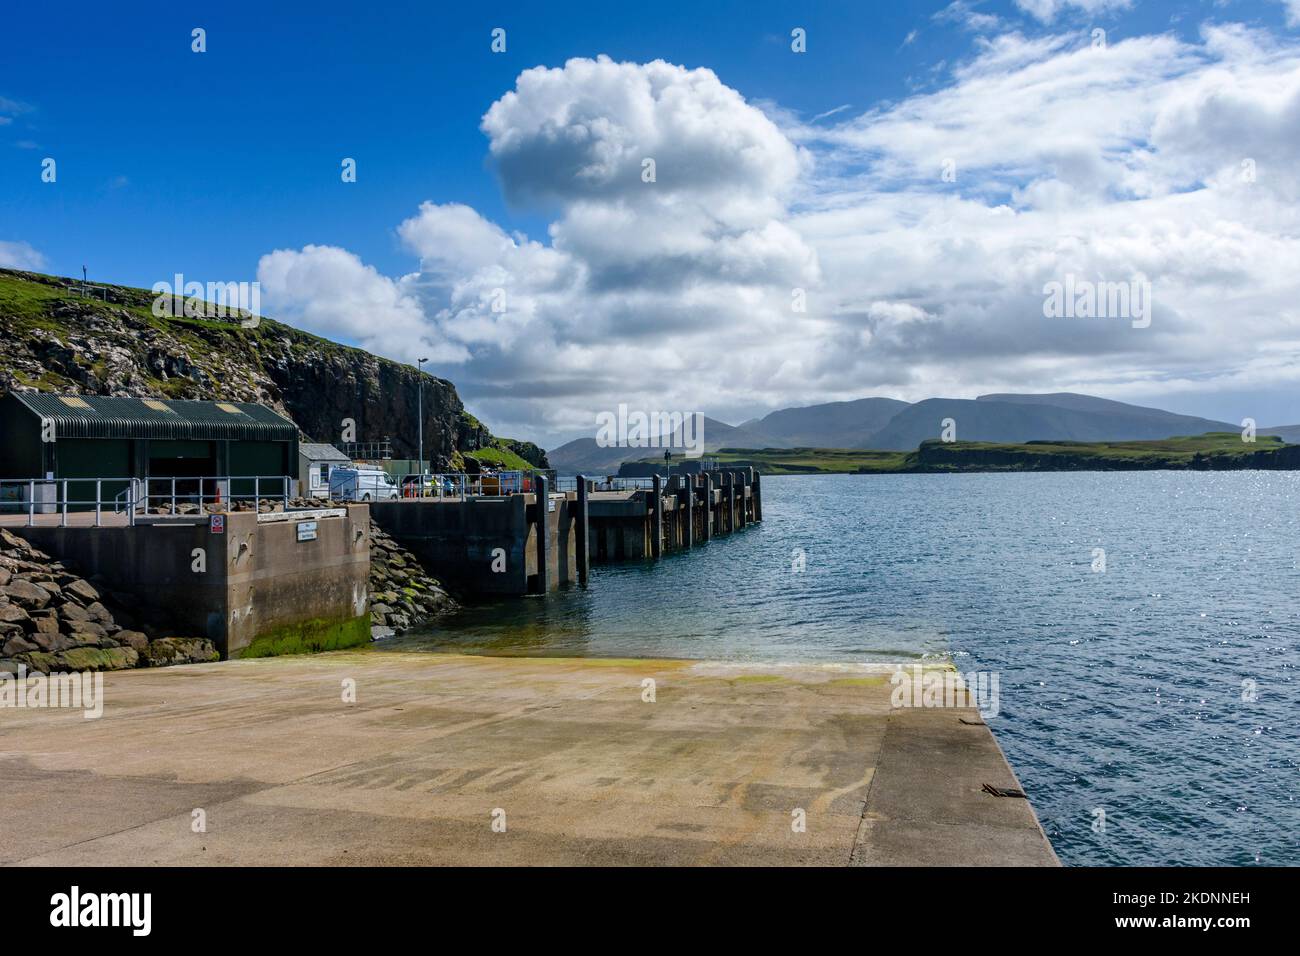 The harbour and jetty, Isle of Canna, Scotland, UK.  The mountains of Rum behind. Stock Photo